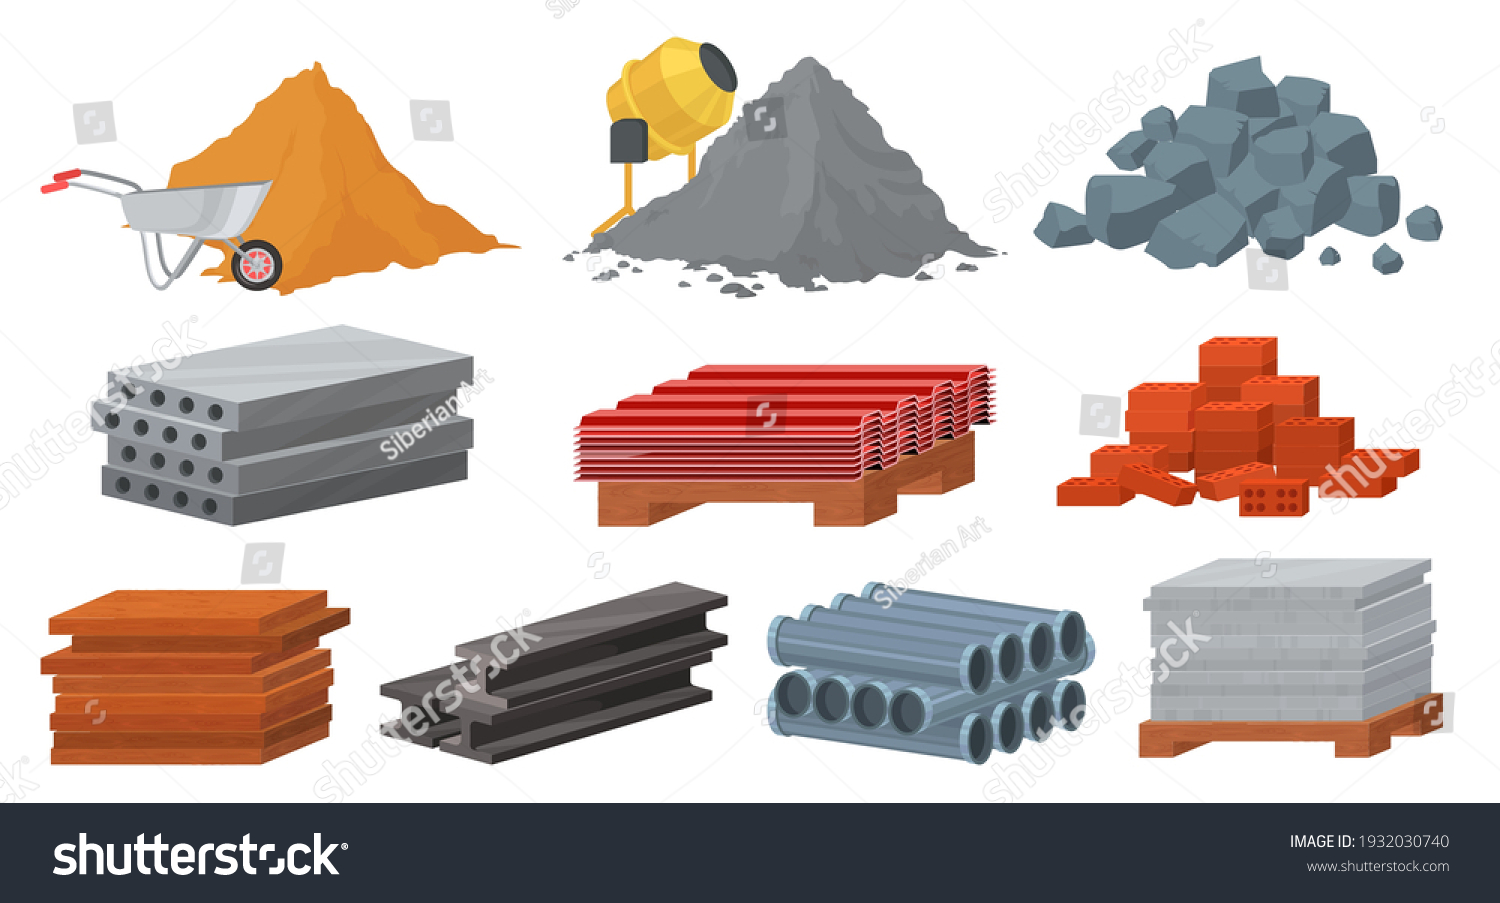 SVG of Construction materials set, flat vector illustration. Pile of sand, cement, stones, bricks. Concrete mixer. Stack of gypsum blocks, metal roof, tile, wooden planks. Materials for building industry. svg